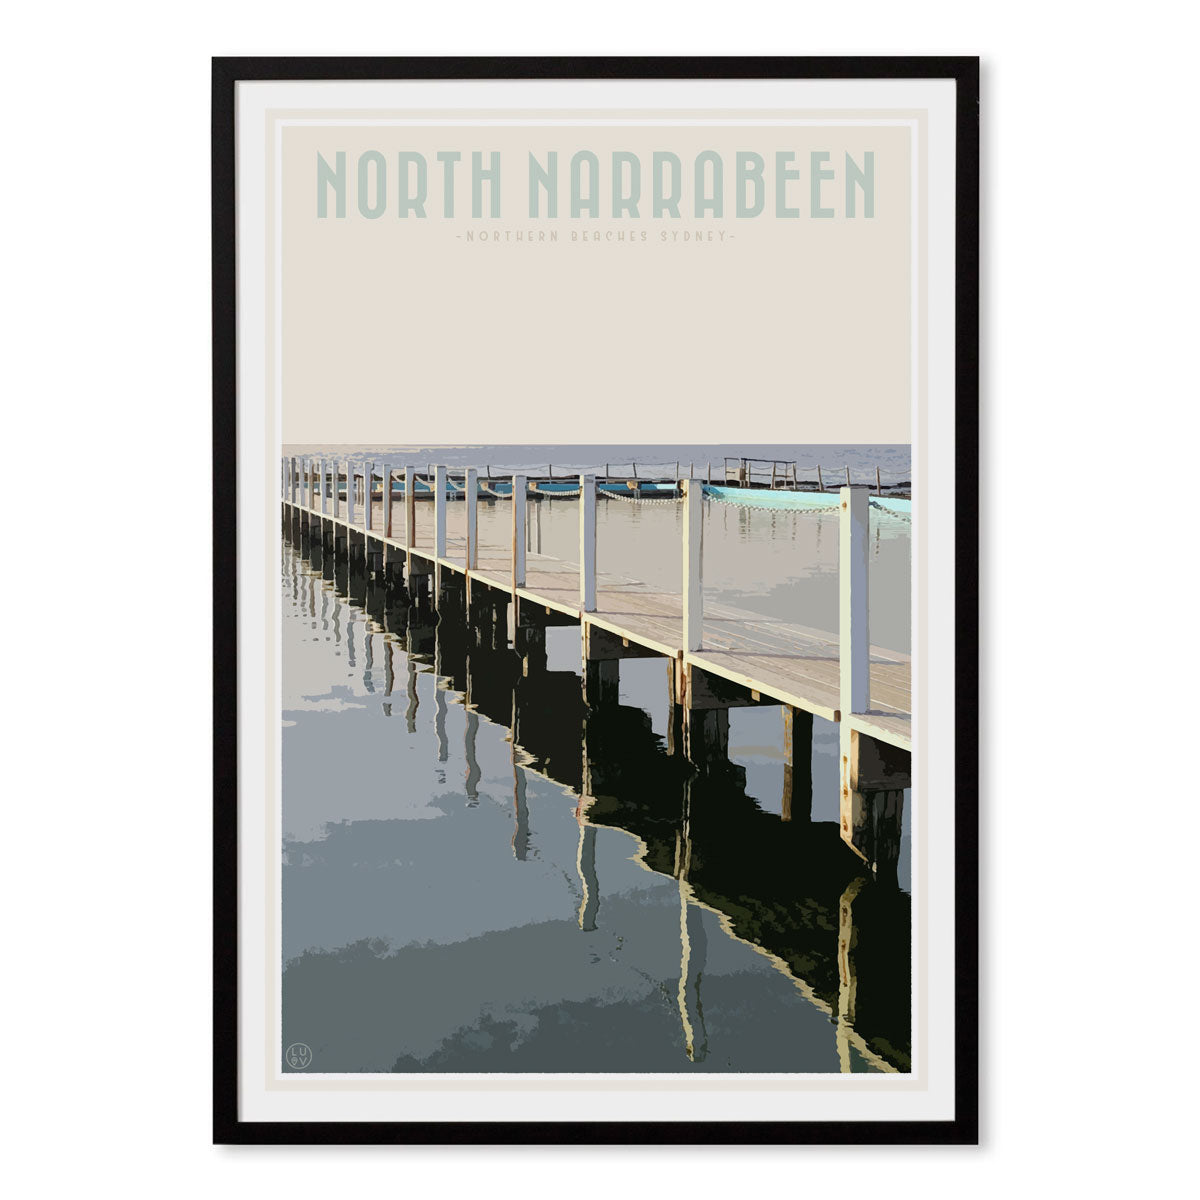 North Narrabeen vintage travel style black framed print by Places We Luv